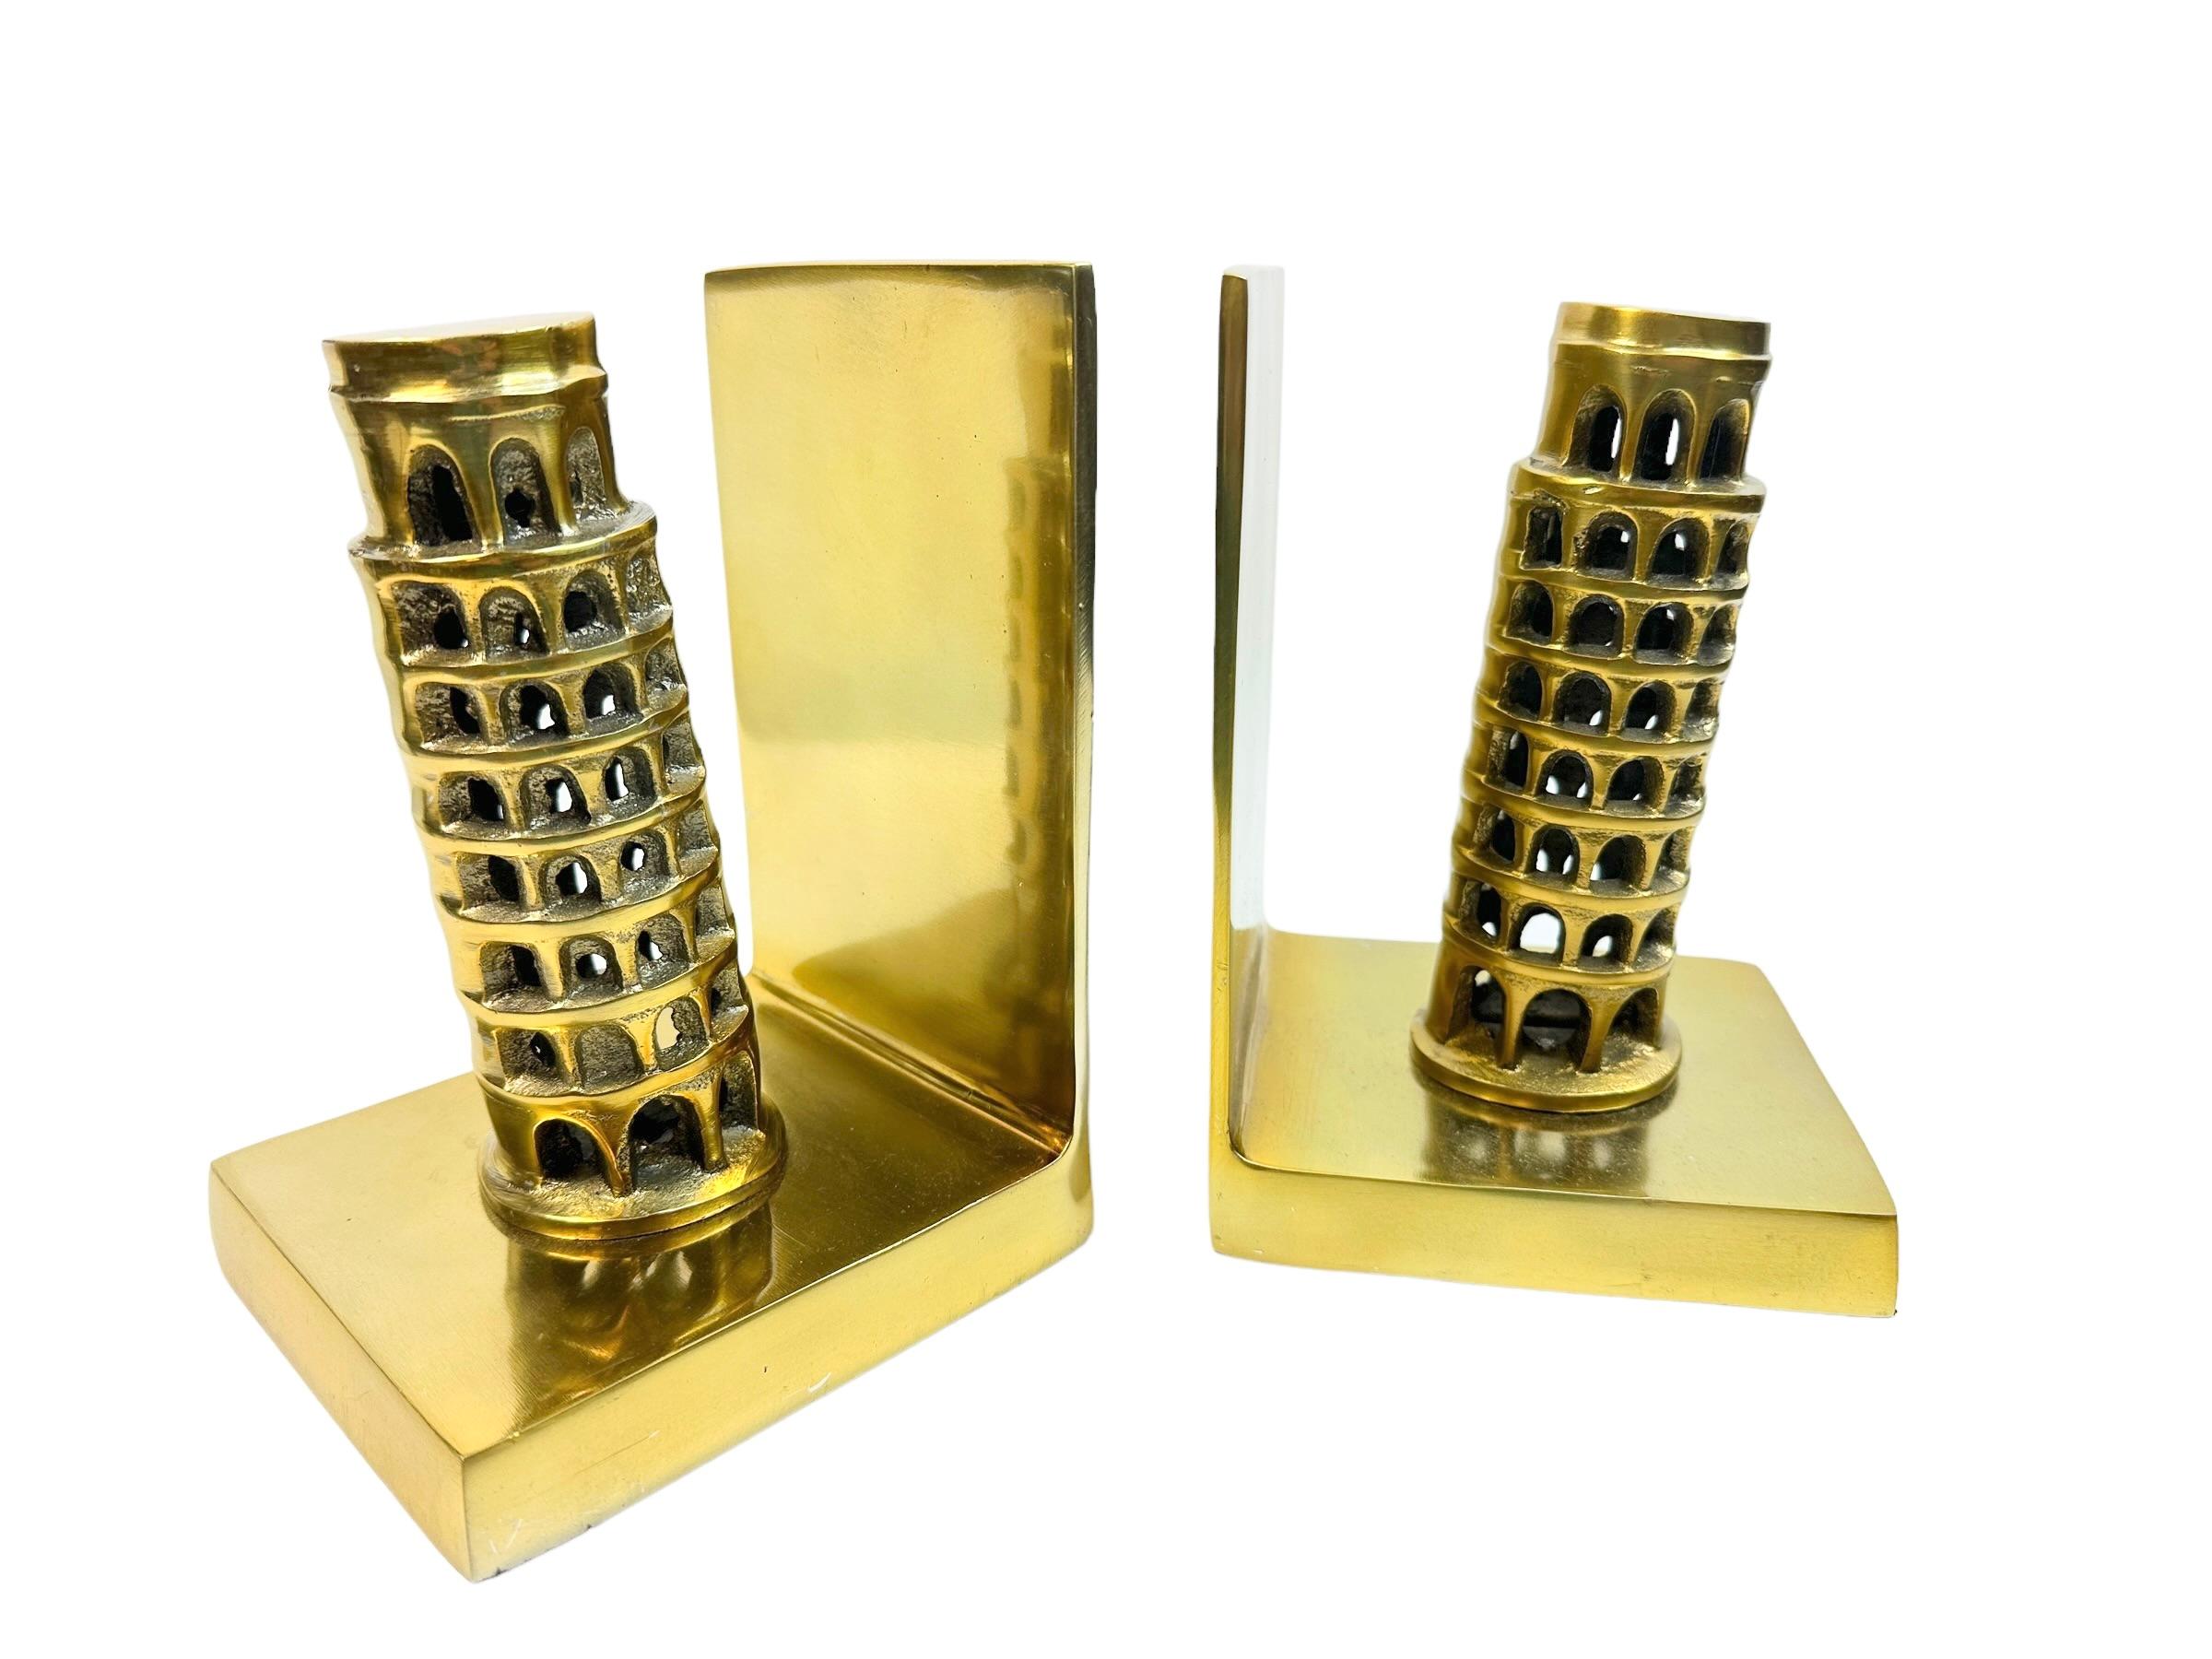 Channeling old world glamor into your home decor, this set of two brass finish bookends is both a useful and decorative addition to your home office, library, study or lounge. Found at an estate sale in Bologna Italy. 